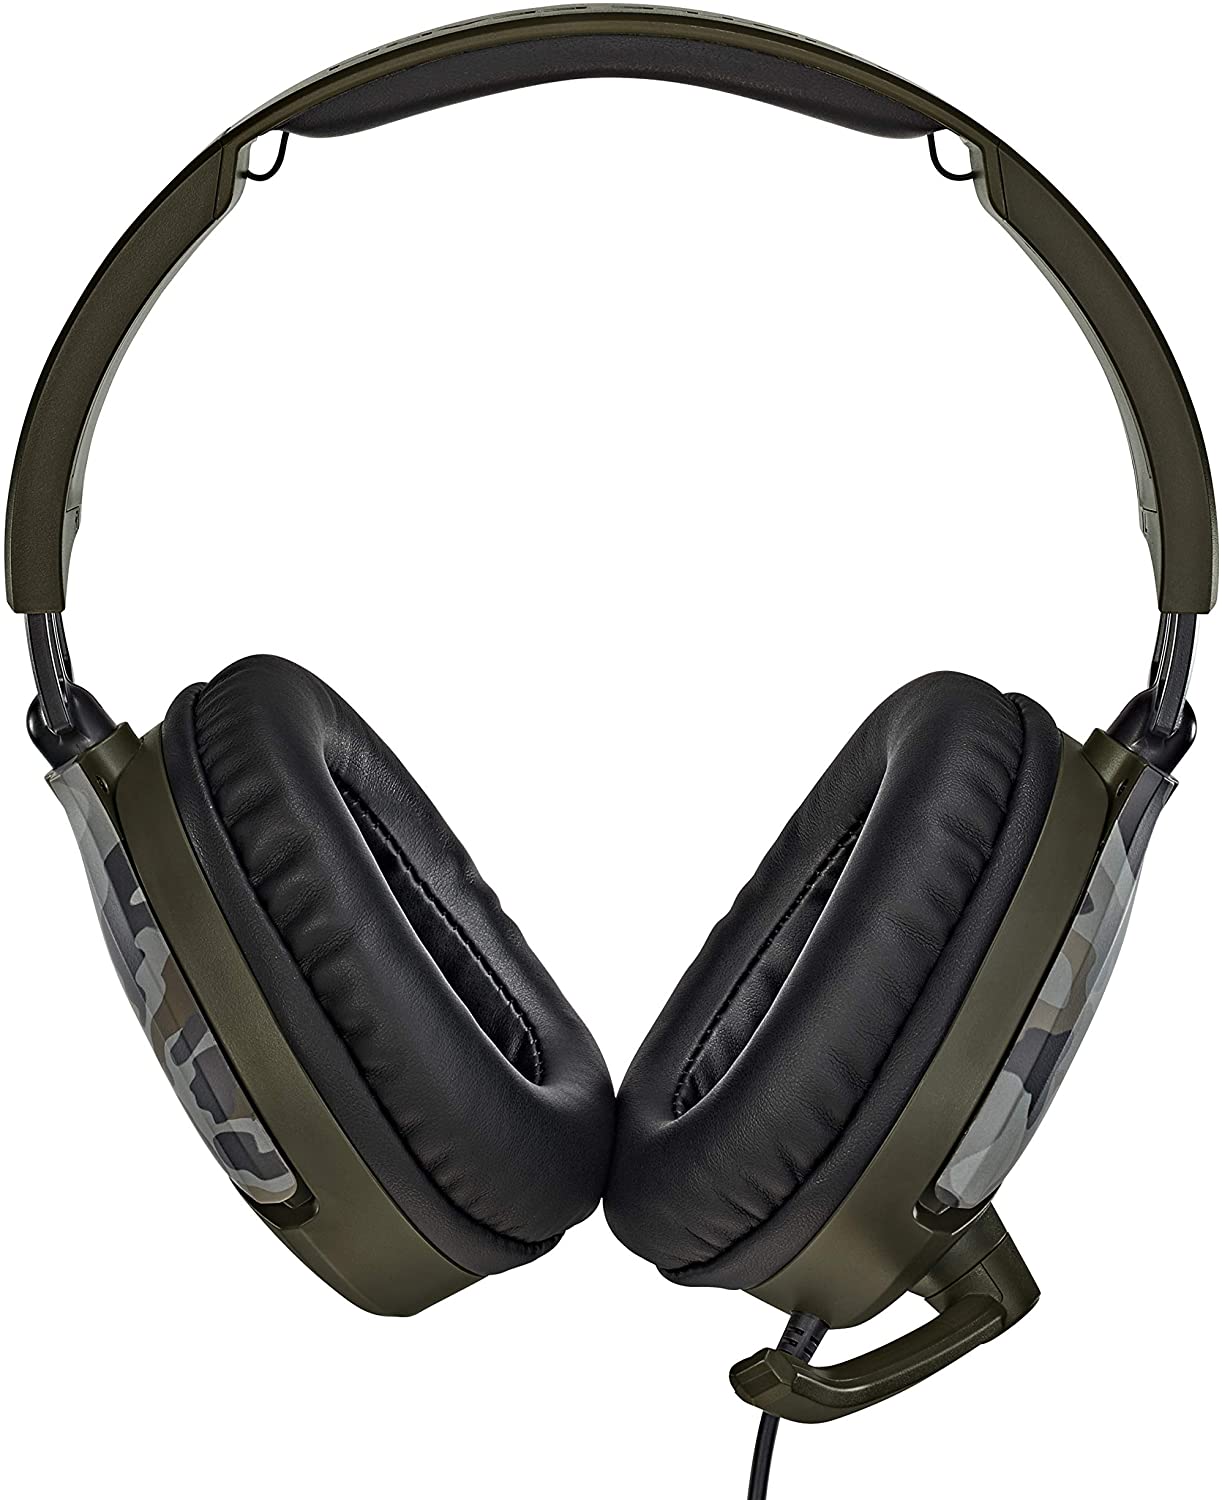 Gaming Headset Turtle Beach Ear Force Recon 70P Camo Green - PS4